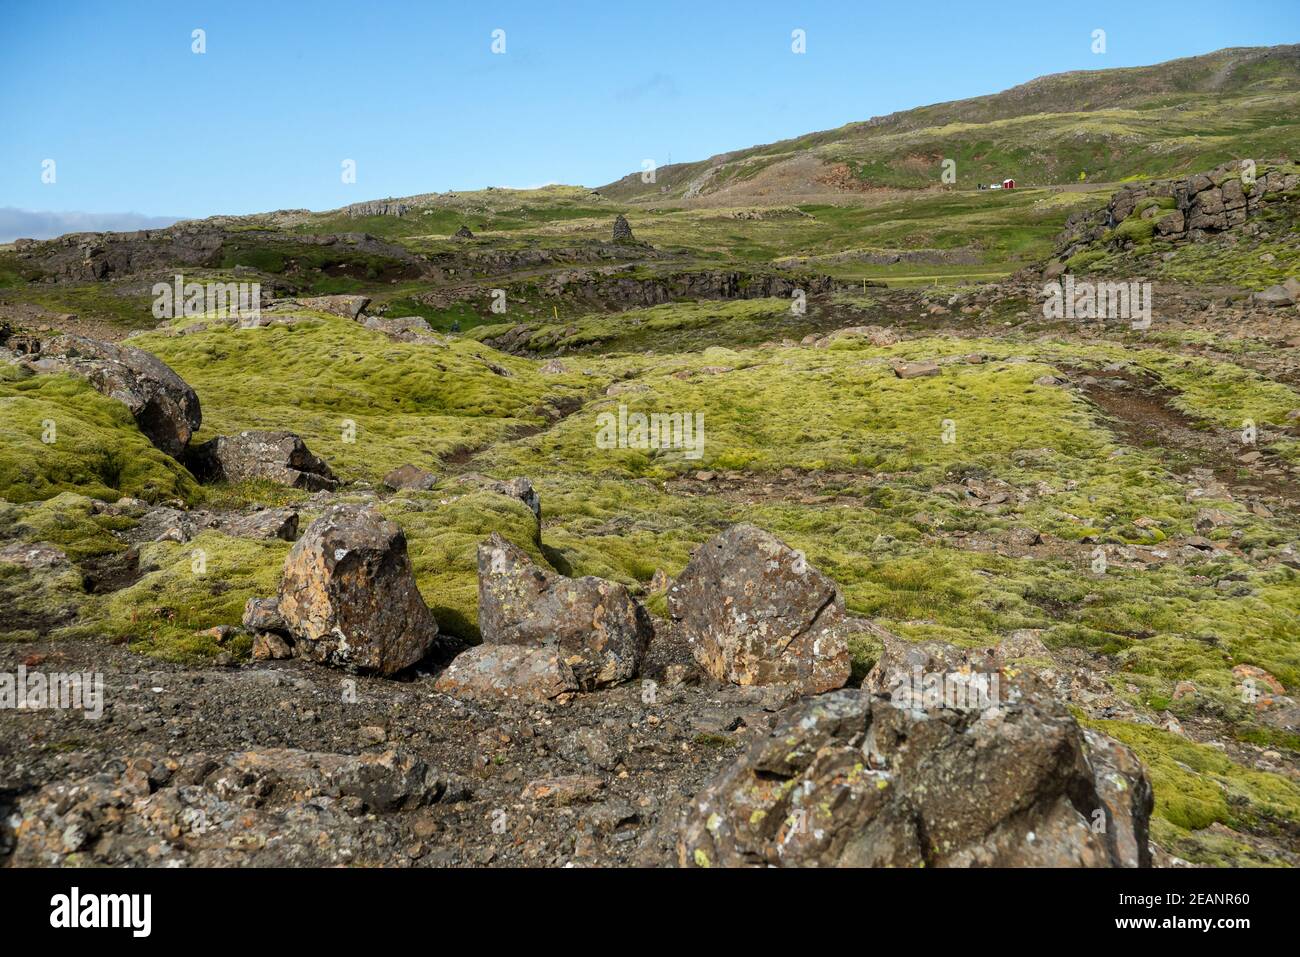 Majestic volcanic landscape covered with moss in Iceland highlands Stock Photo